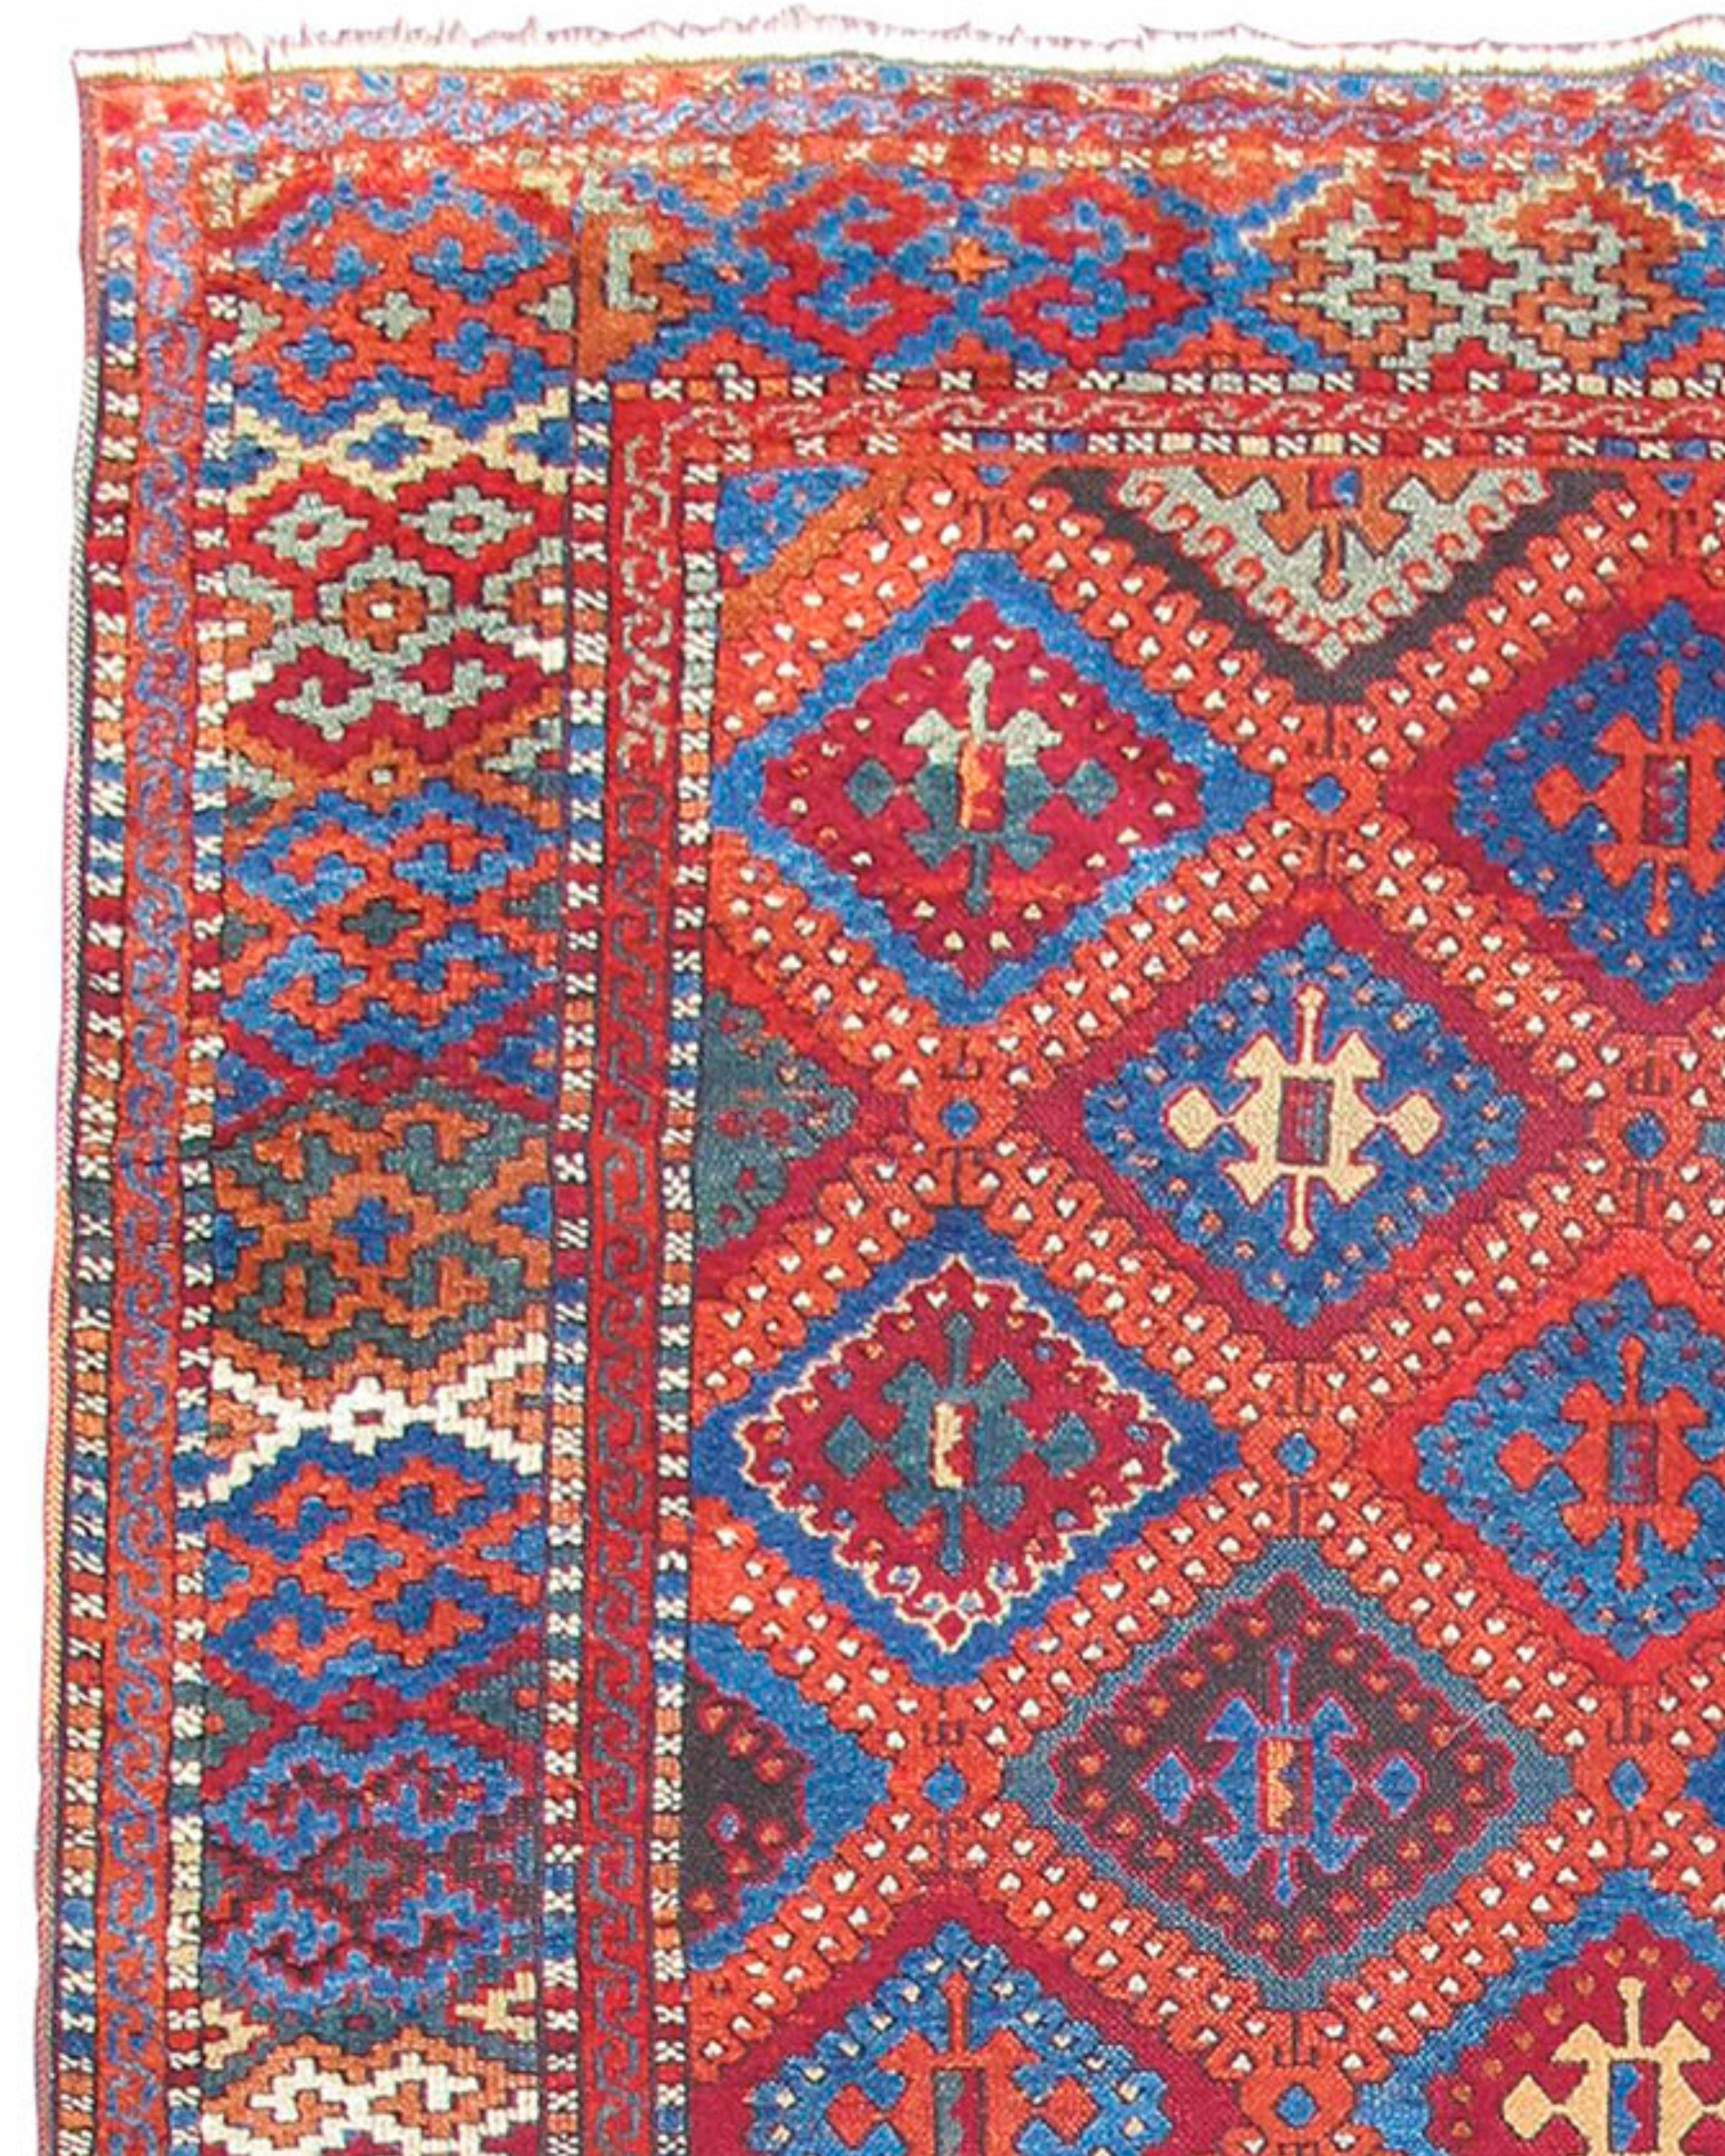 Antique Turkish Sarkisla Kurdish Rug, Late 19th Century In Excellent Condition For Sale In San Francisco, CA